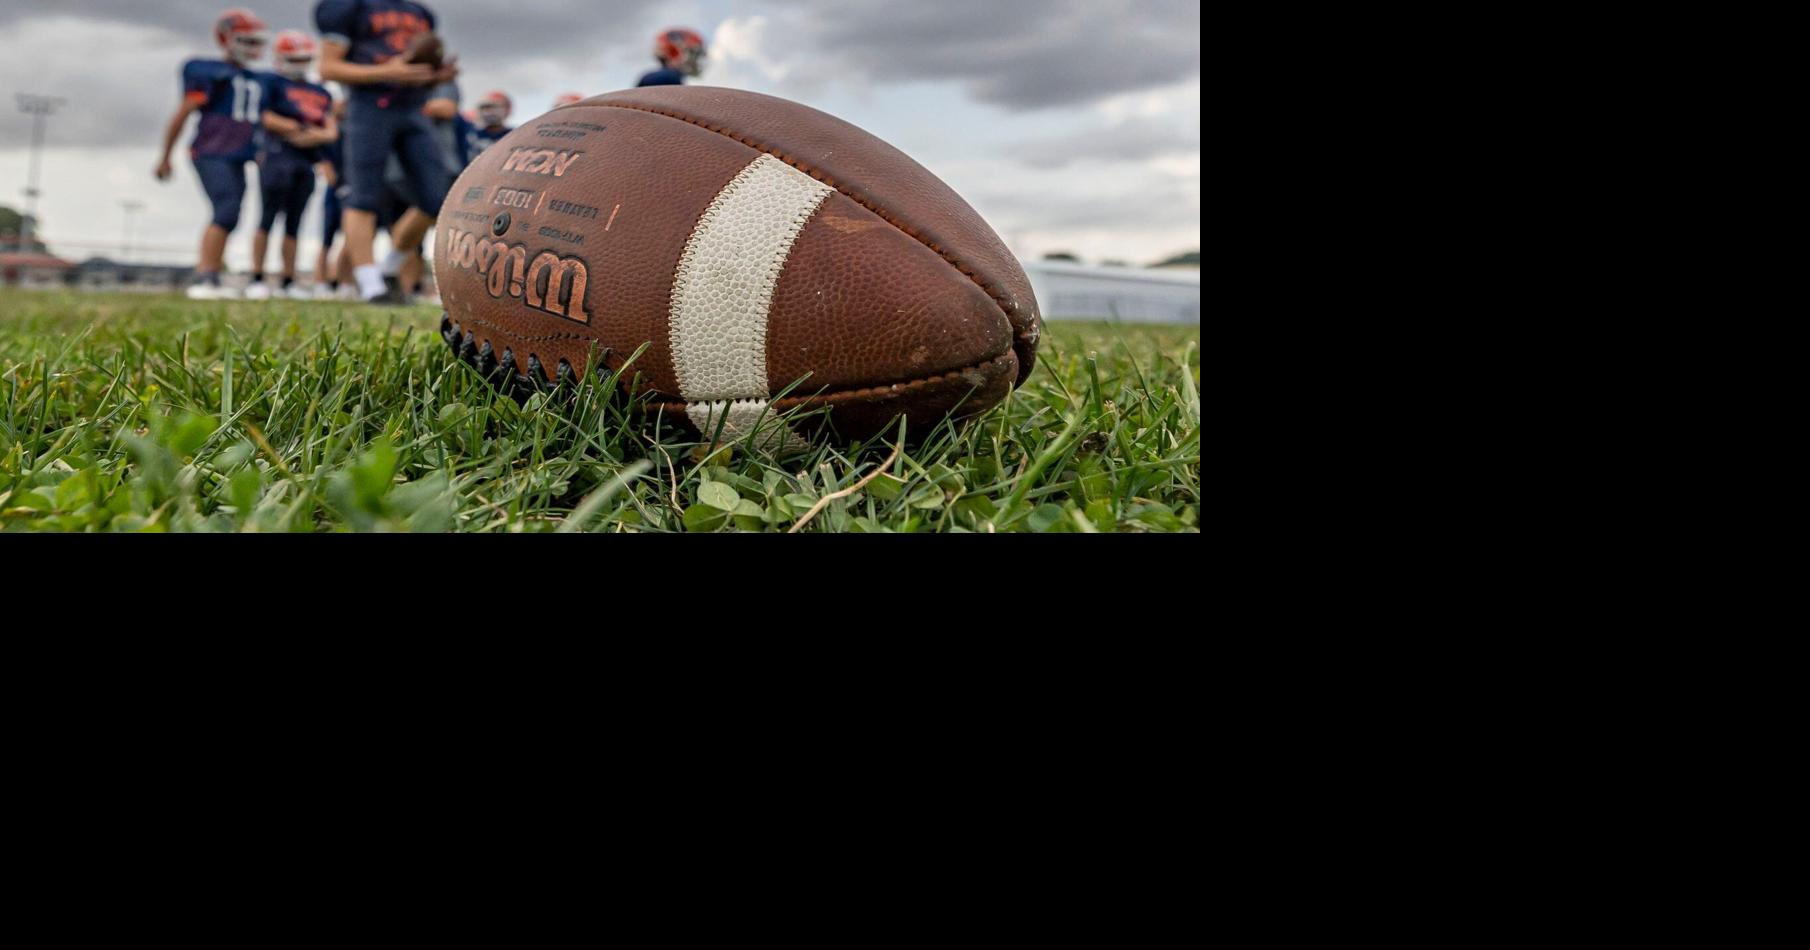 Live Week 7 score updates from throughout the Central Illinois area